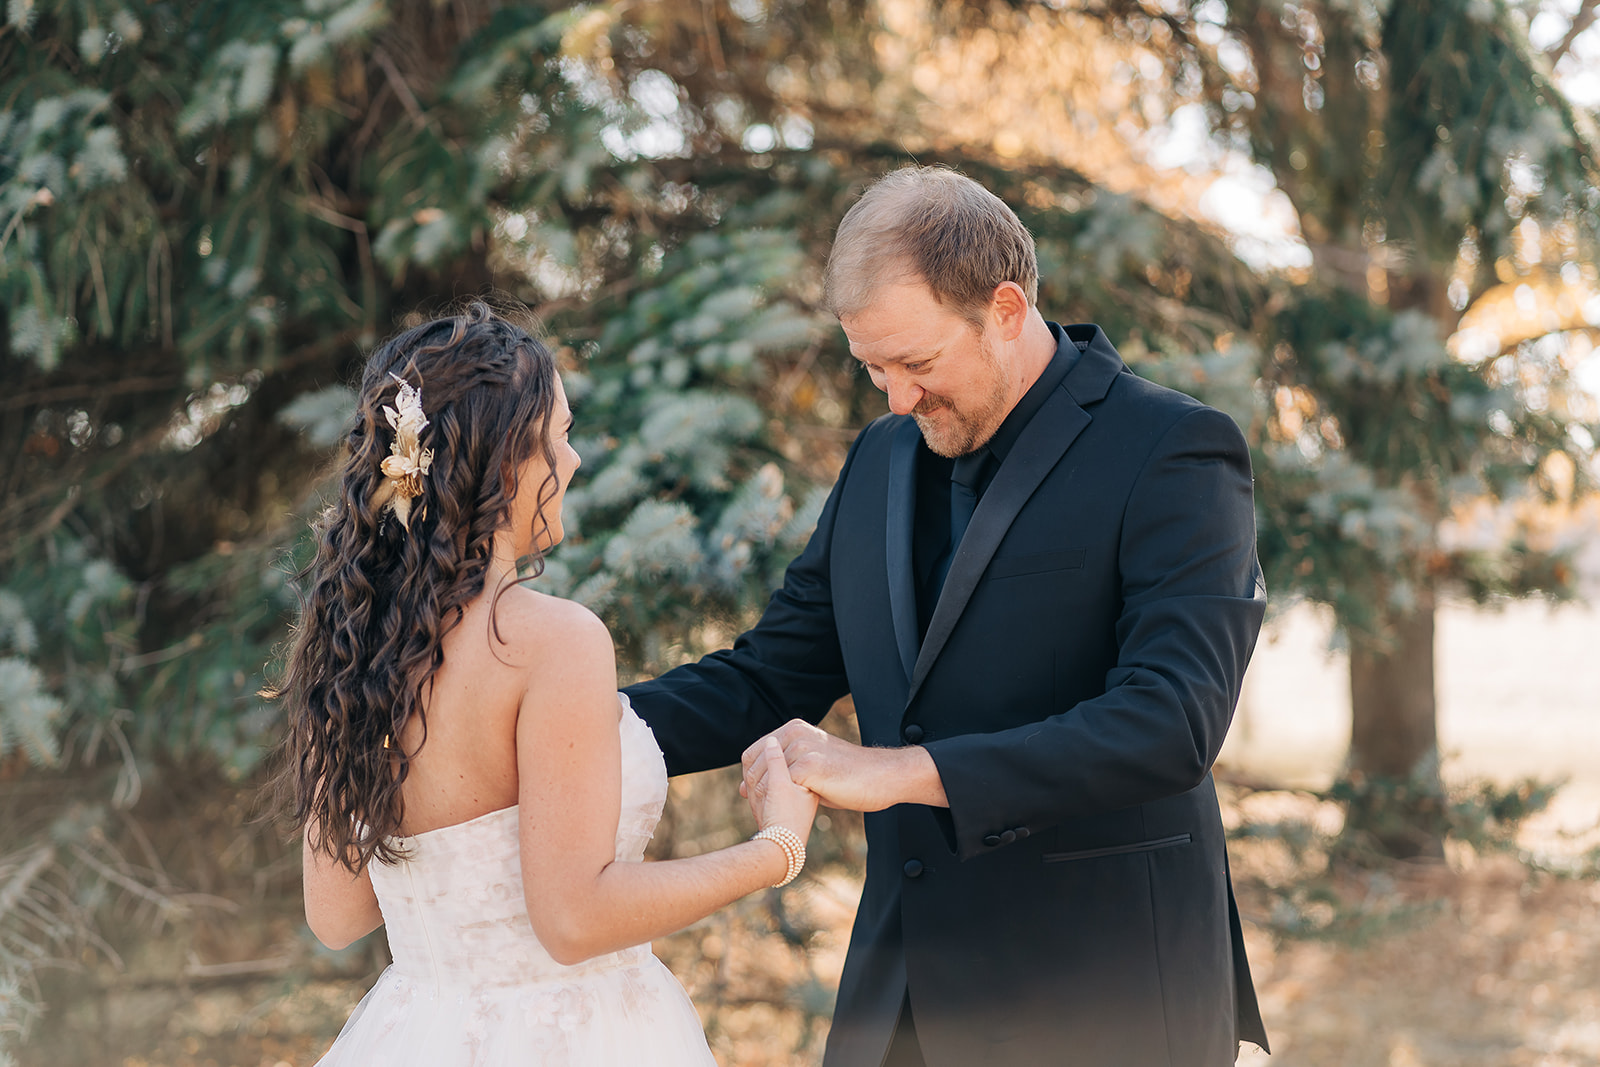 A bride and groom share their first look outdoors on their wedding day.